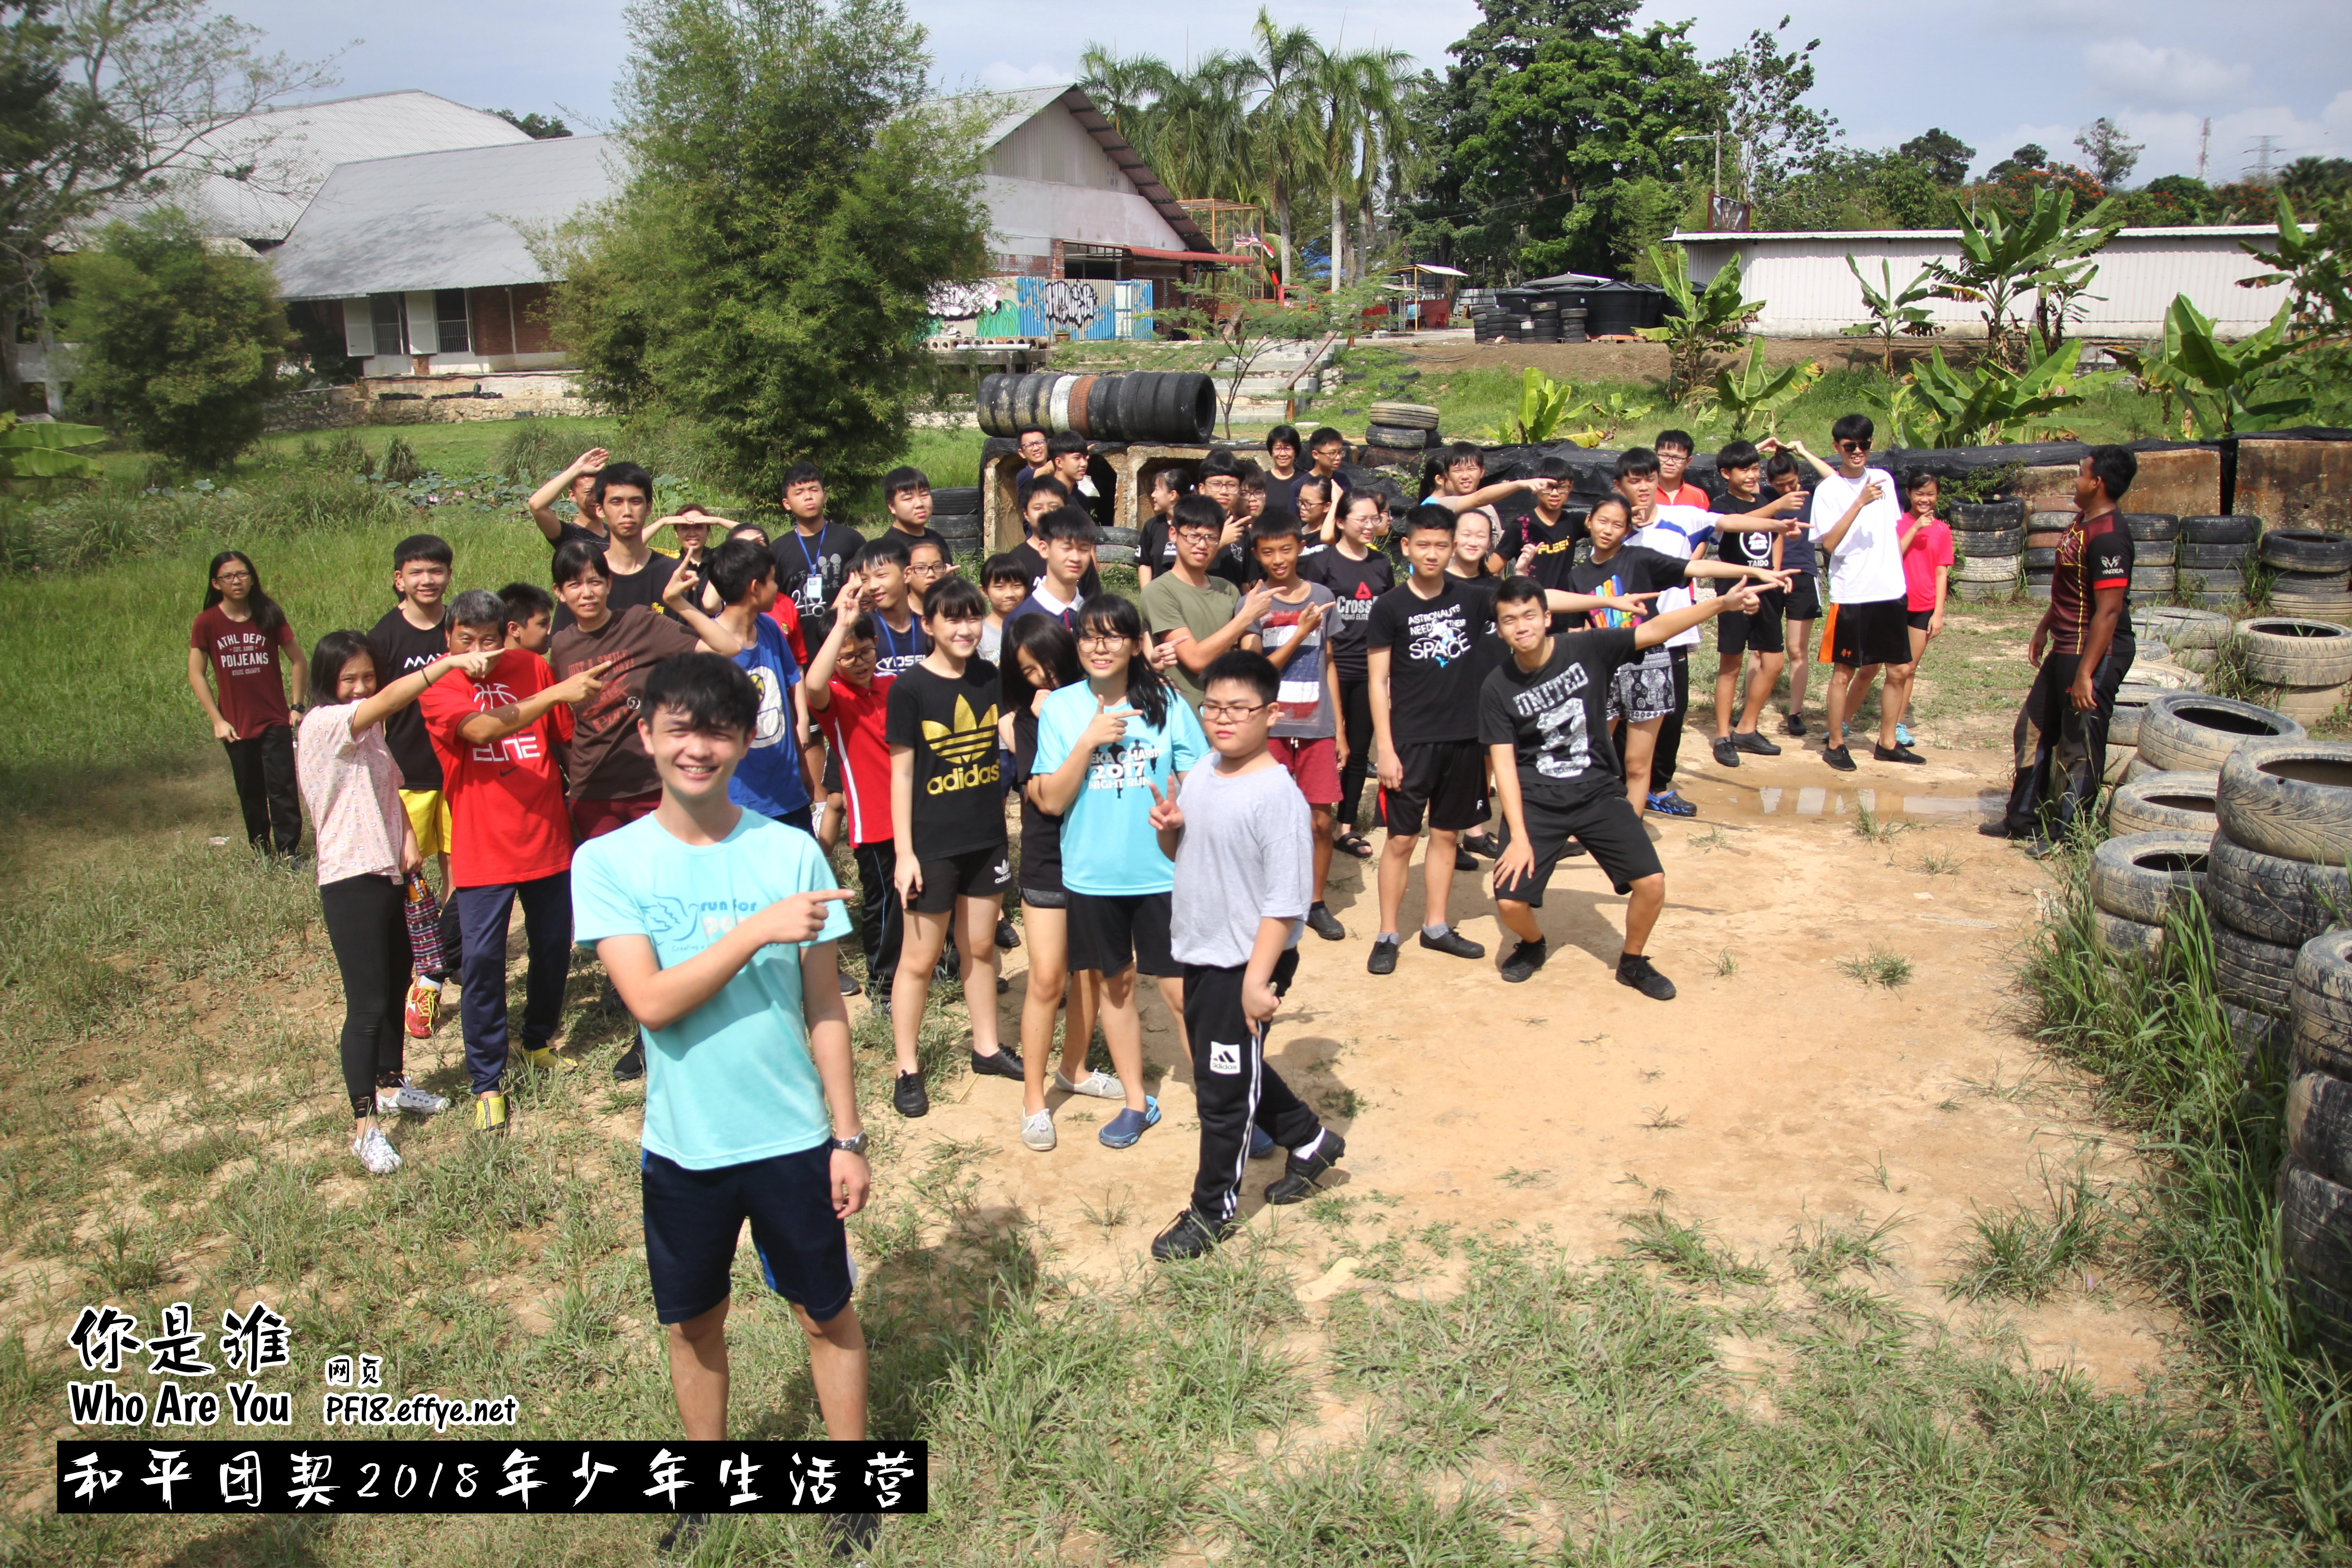 Peace Fellowship Youth Camp 2018 Who Are You 和平团契 2018 年少年生活营 你是谁 A002-002